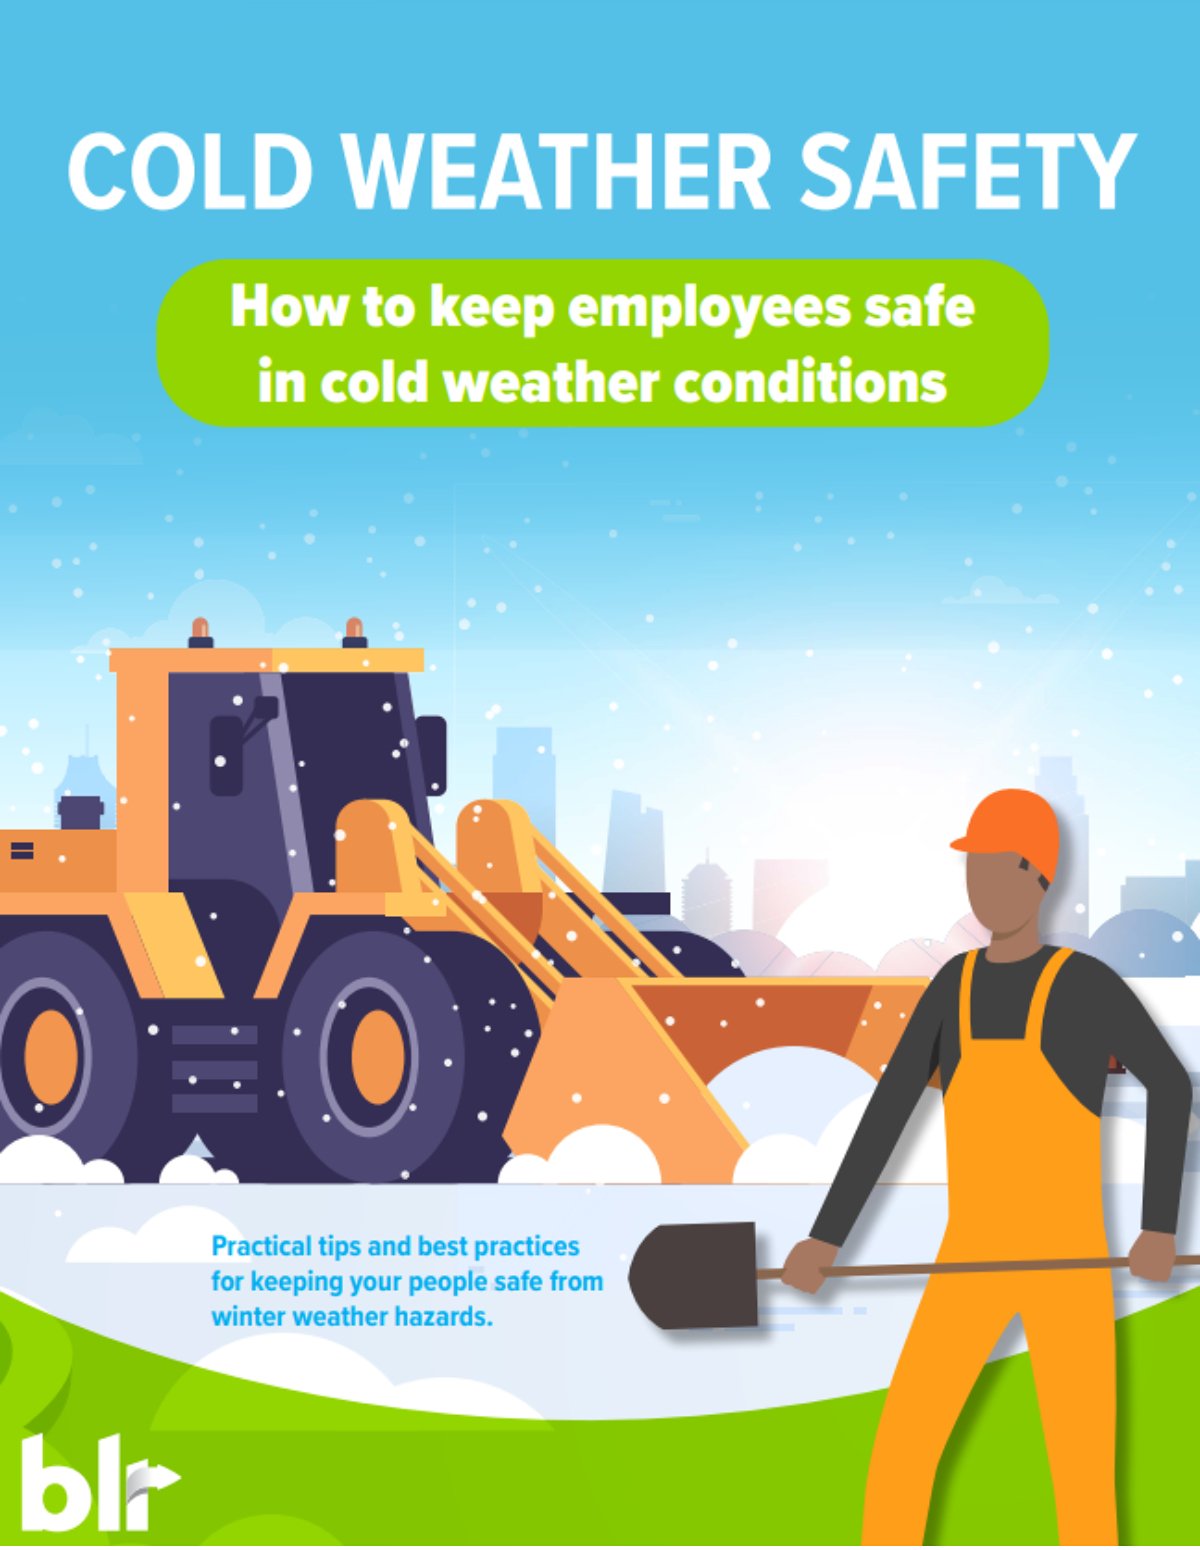 Cold weather safety guide: How to keep your employees safe in cold weather conditions